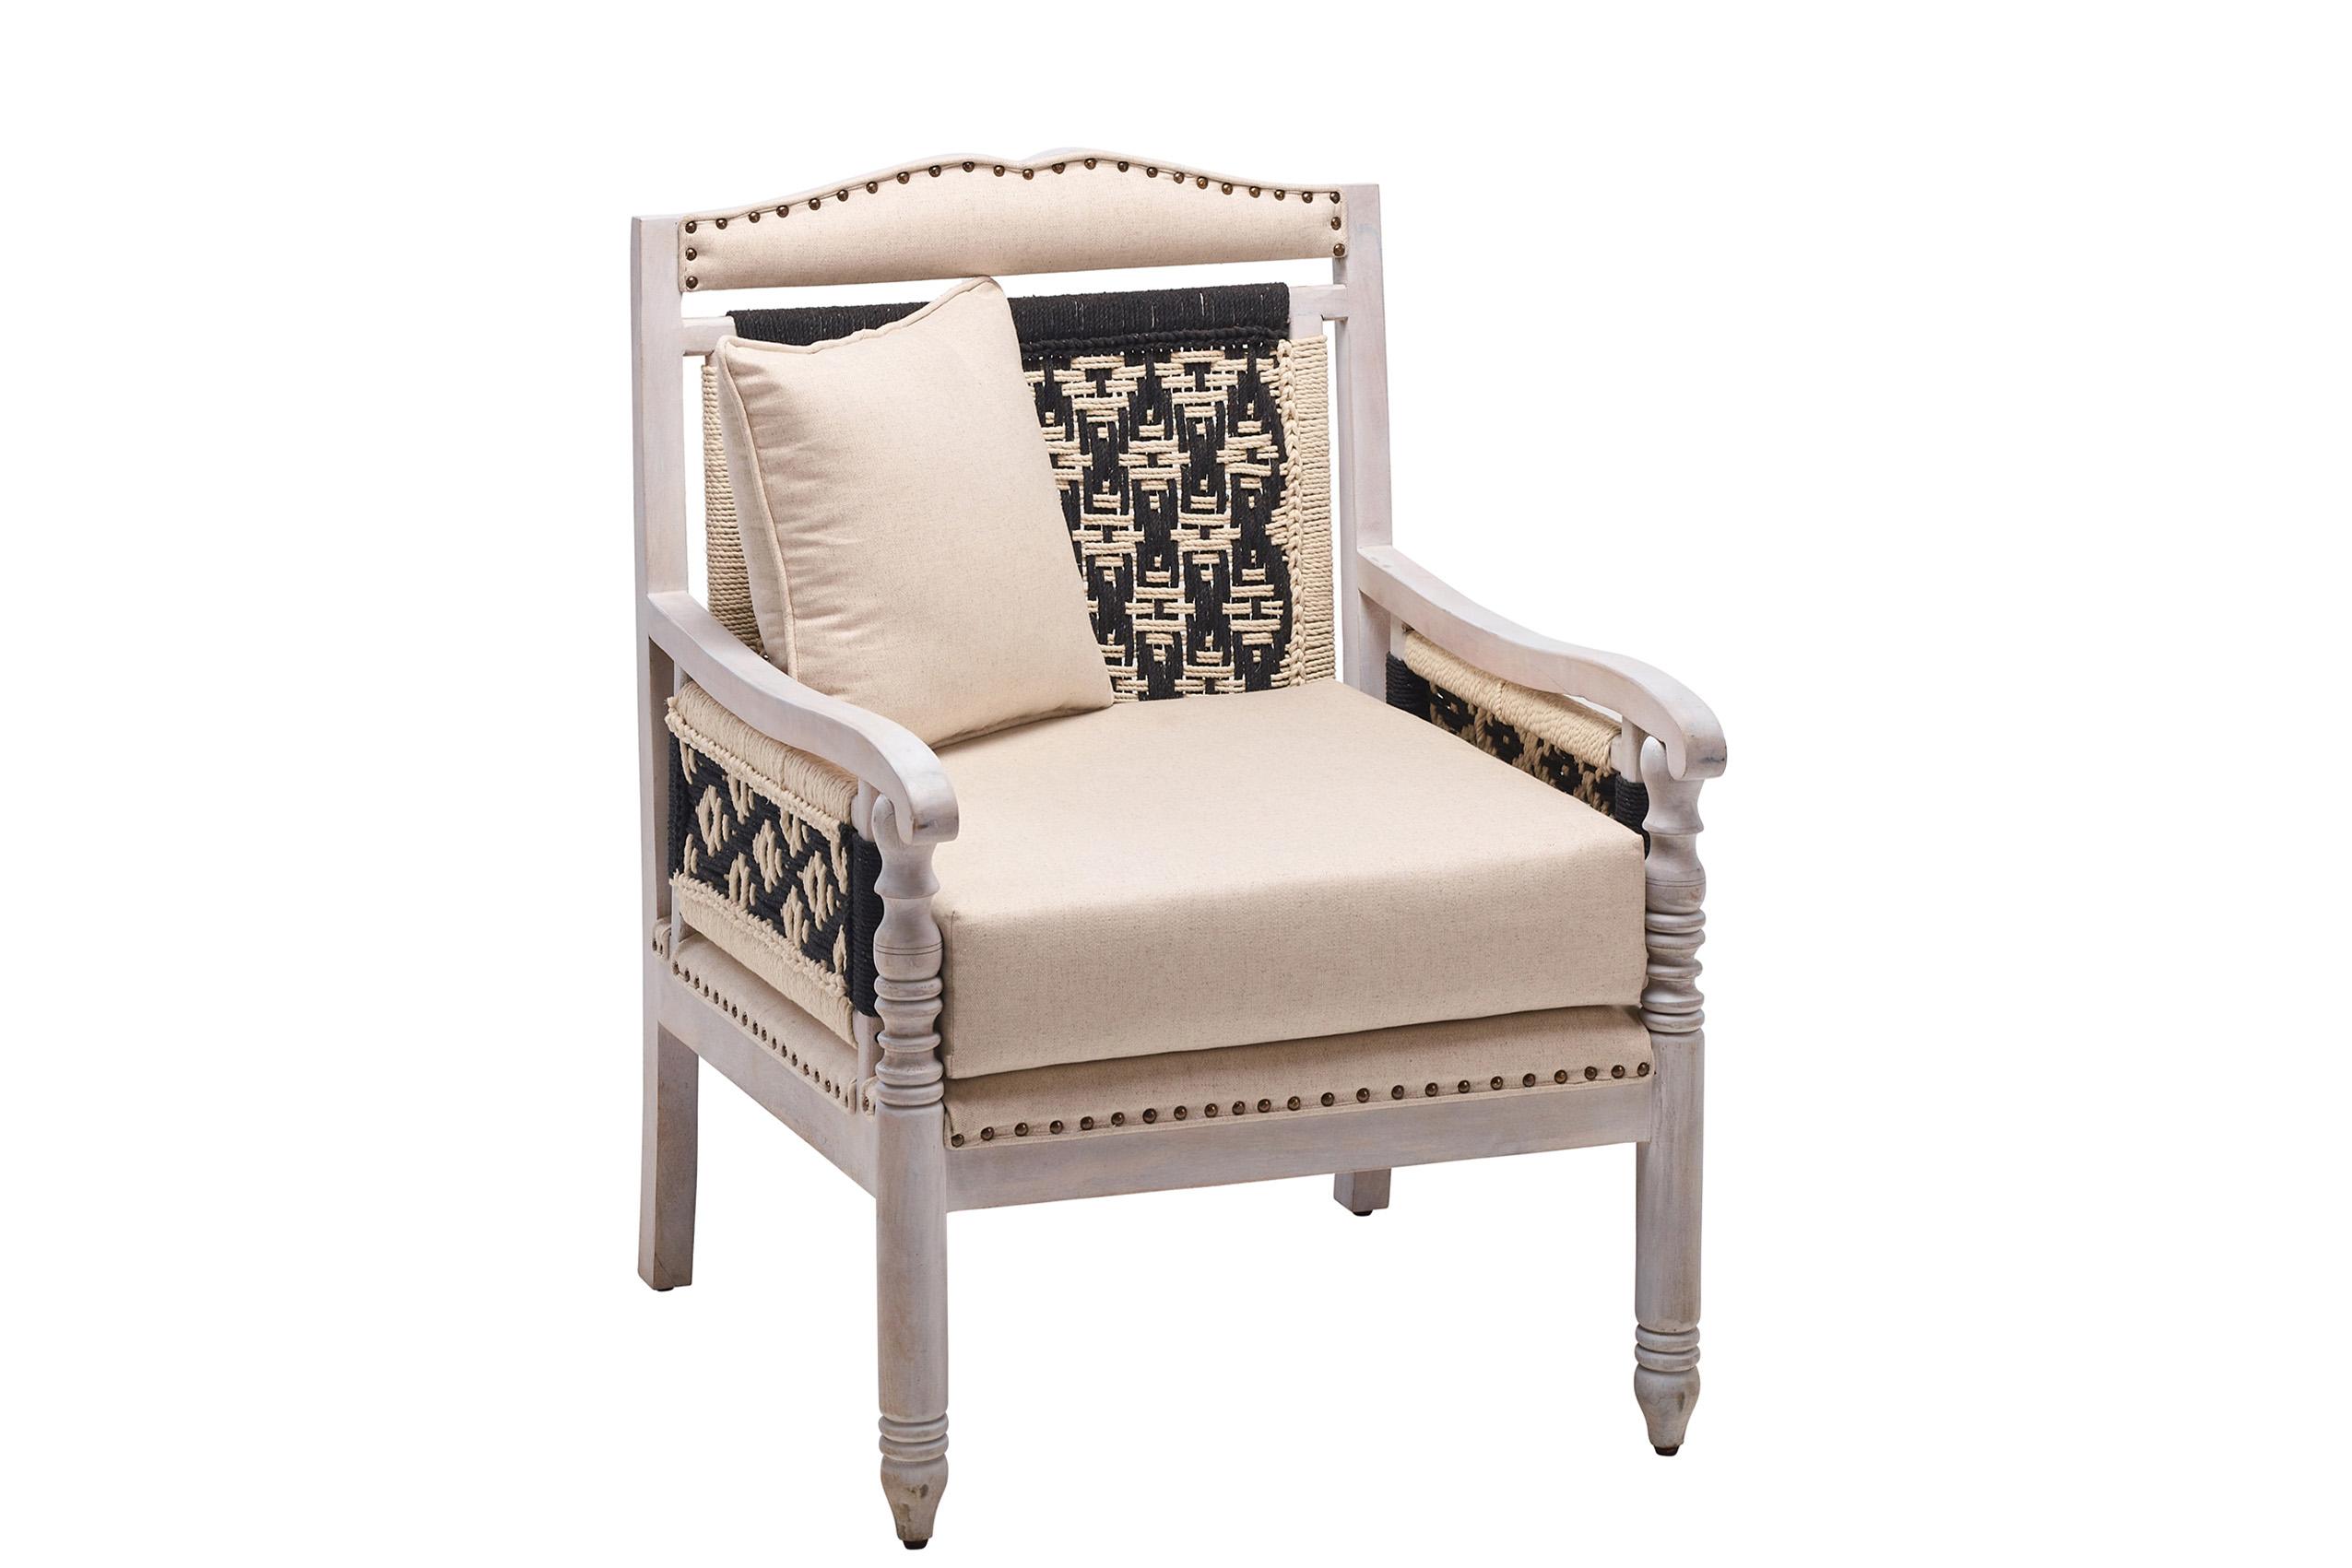 Classic Arm Chair CAC-81023 CAC-81023 in Black, Beige Fabric